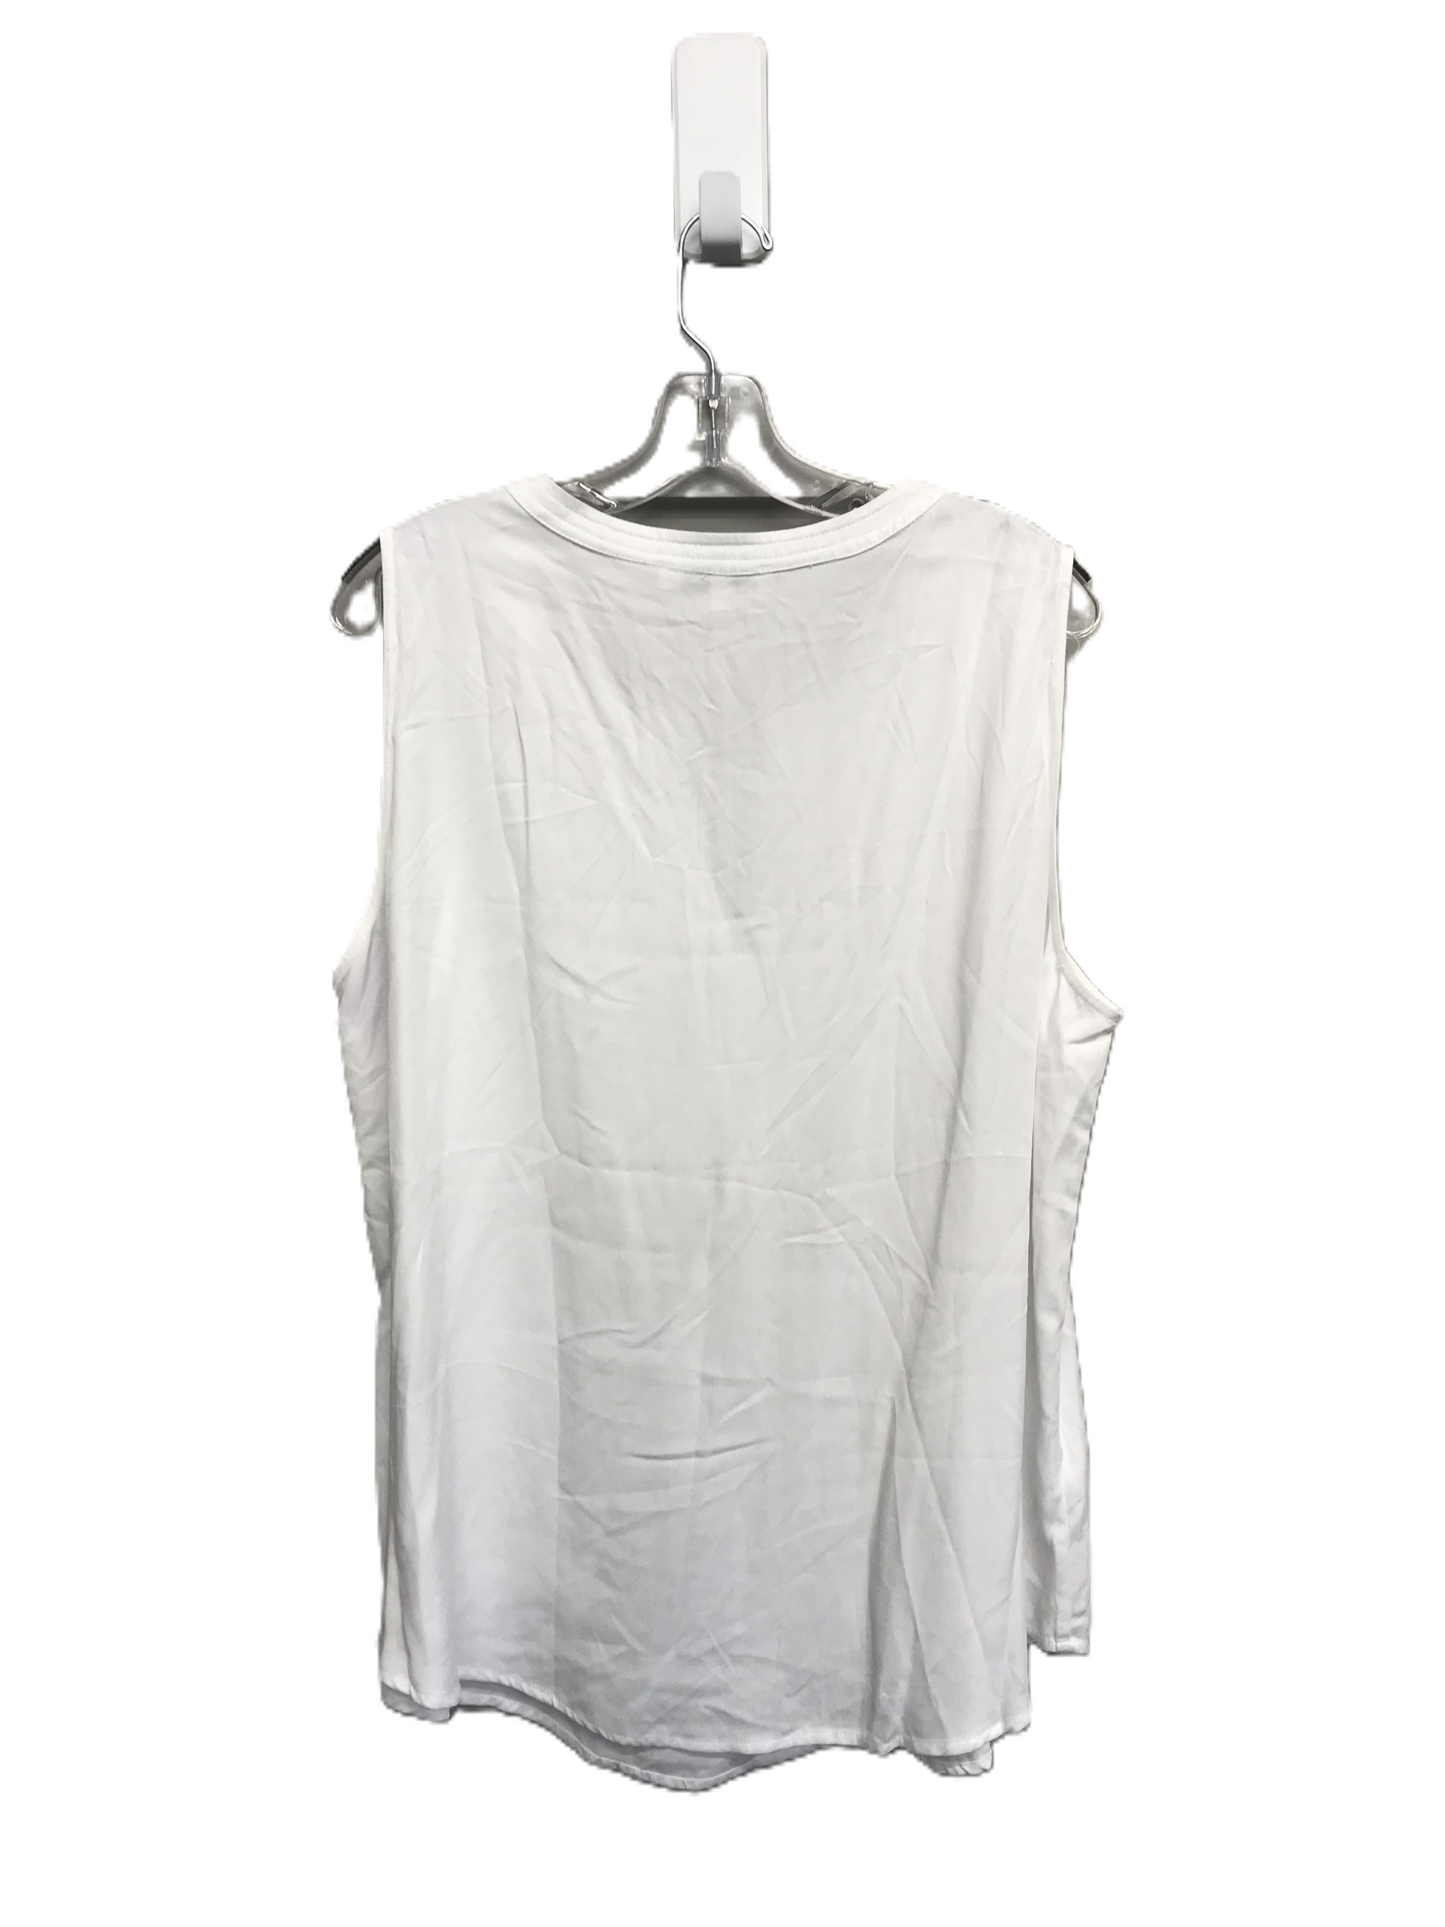 White Top Sleeveless By Rose And Olive, Size: 1x